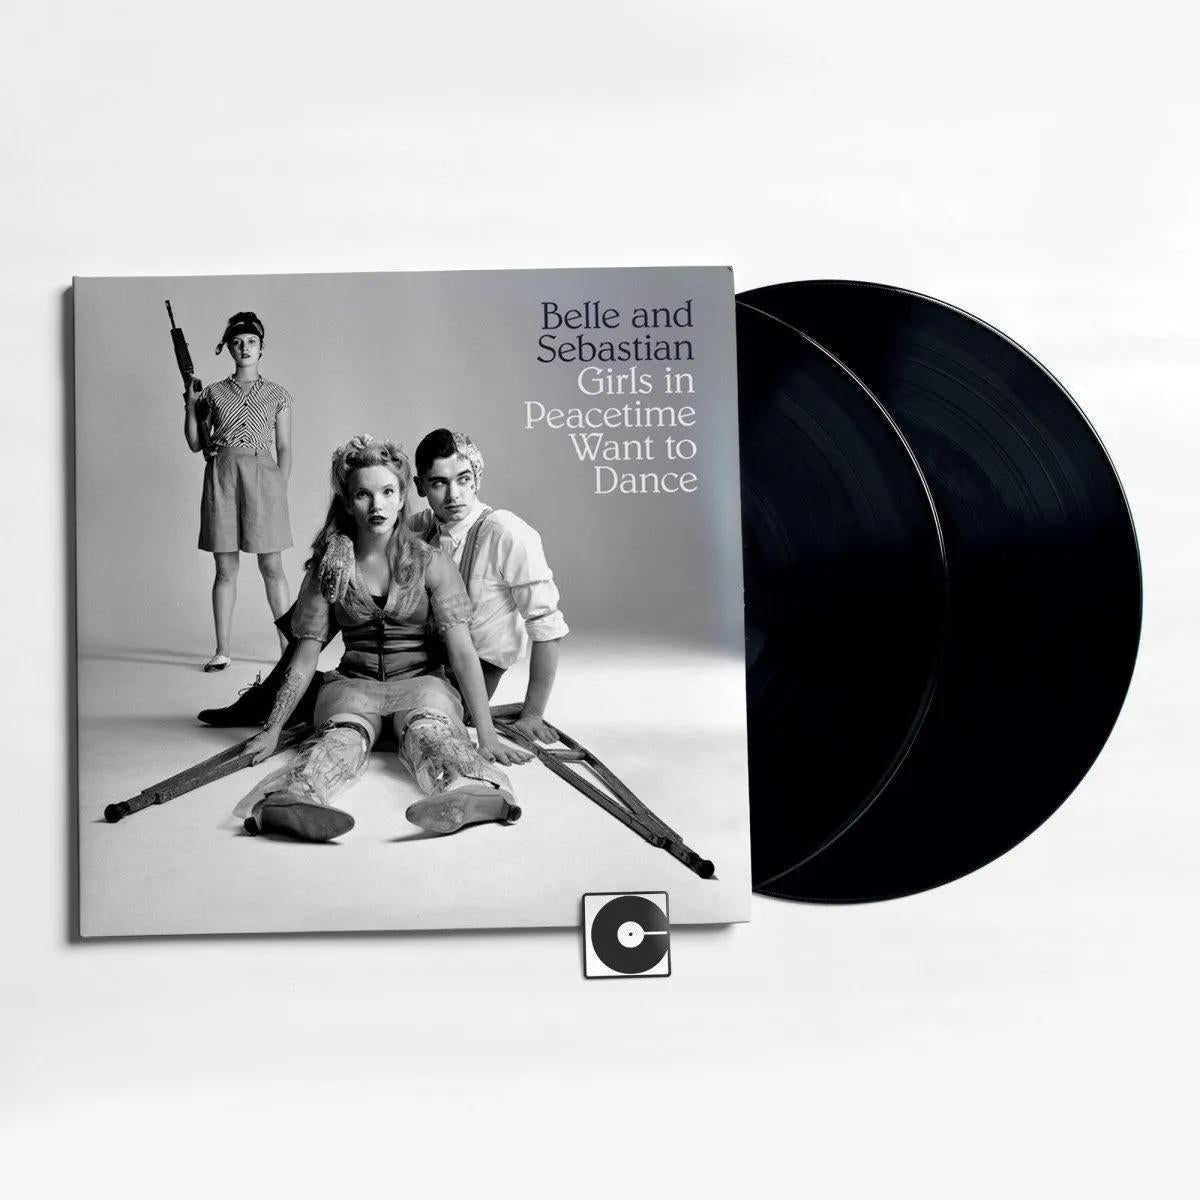 Belle And Sebastian - "Girls In Peacetime Want To Dance"